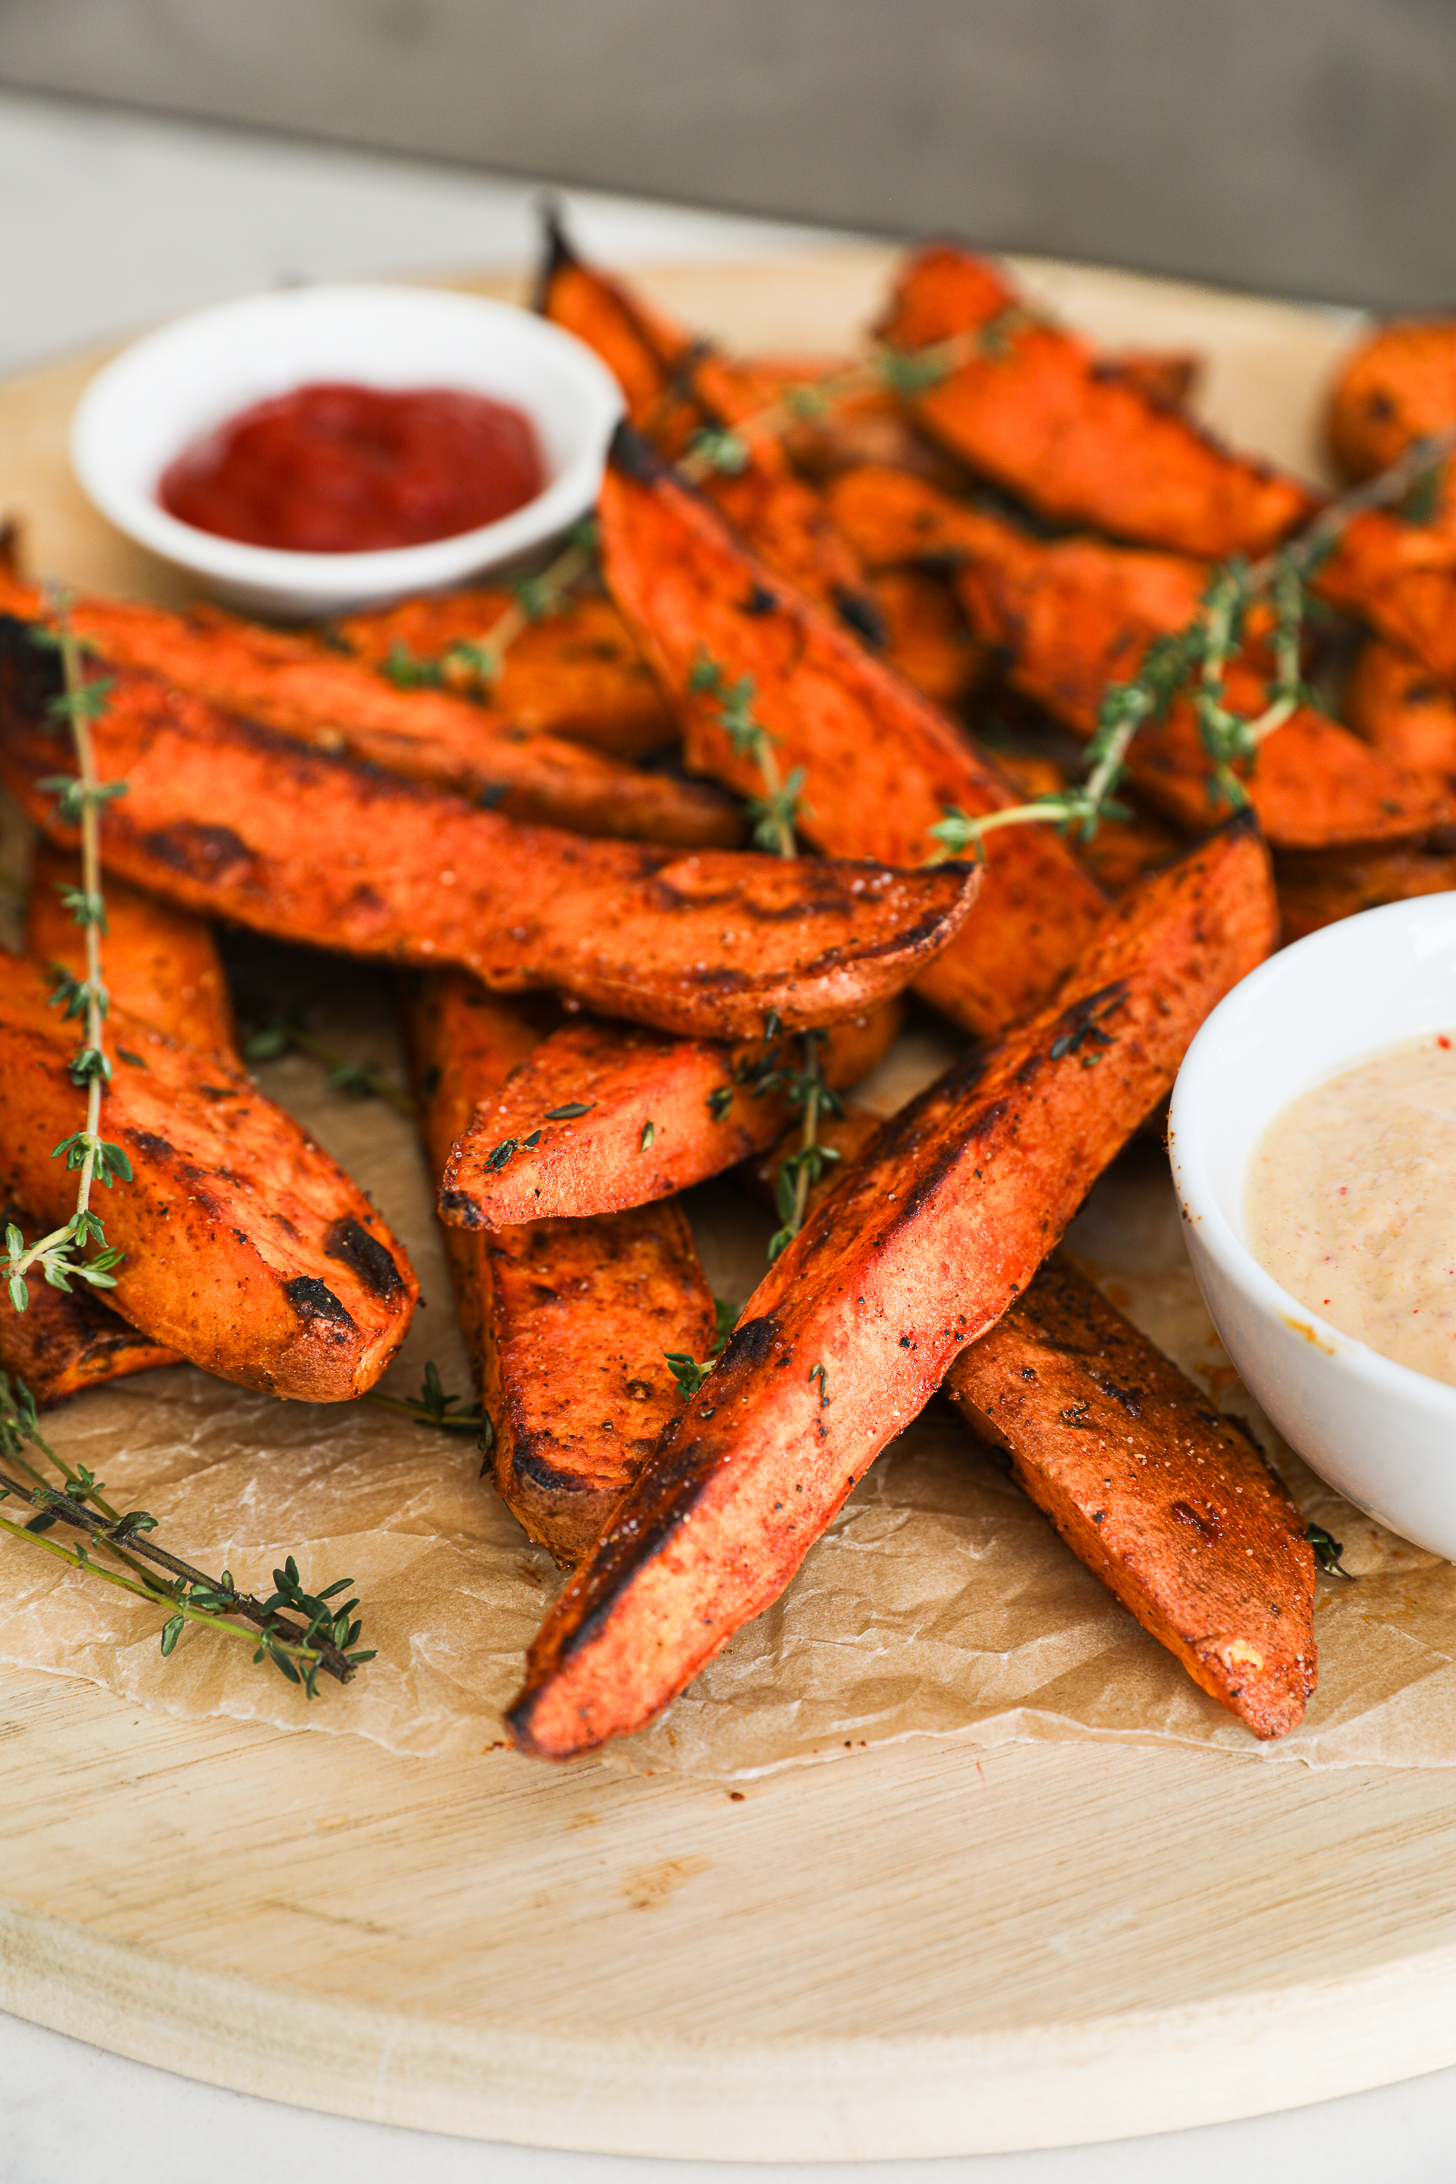 A close-up photo featuring golden-brown sweet potato wedges, garnished with fresh thyme sprigs, accompanied by two dipping sauces nearby.